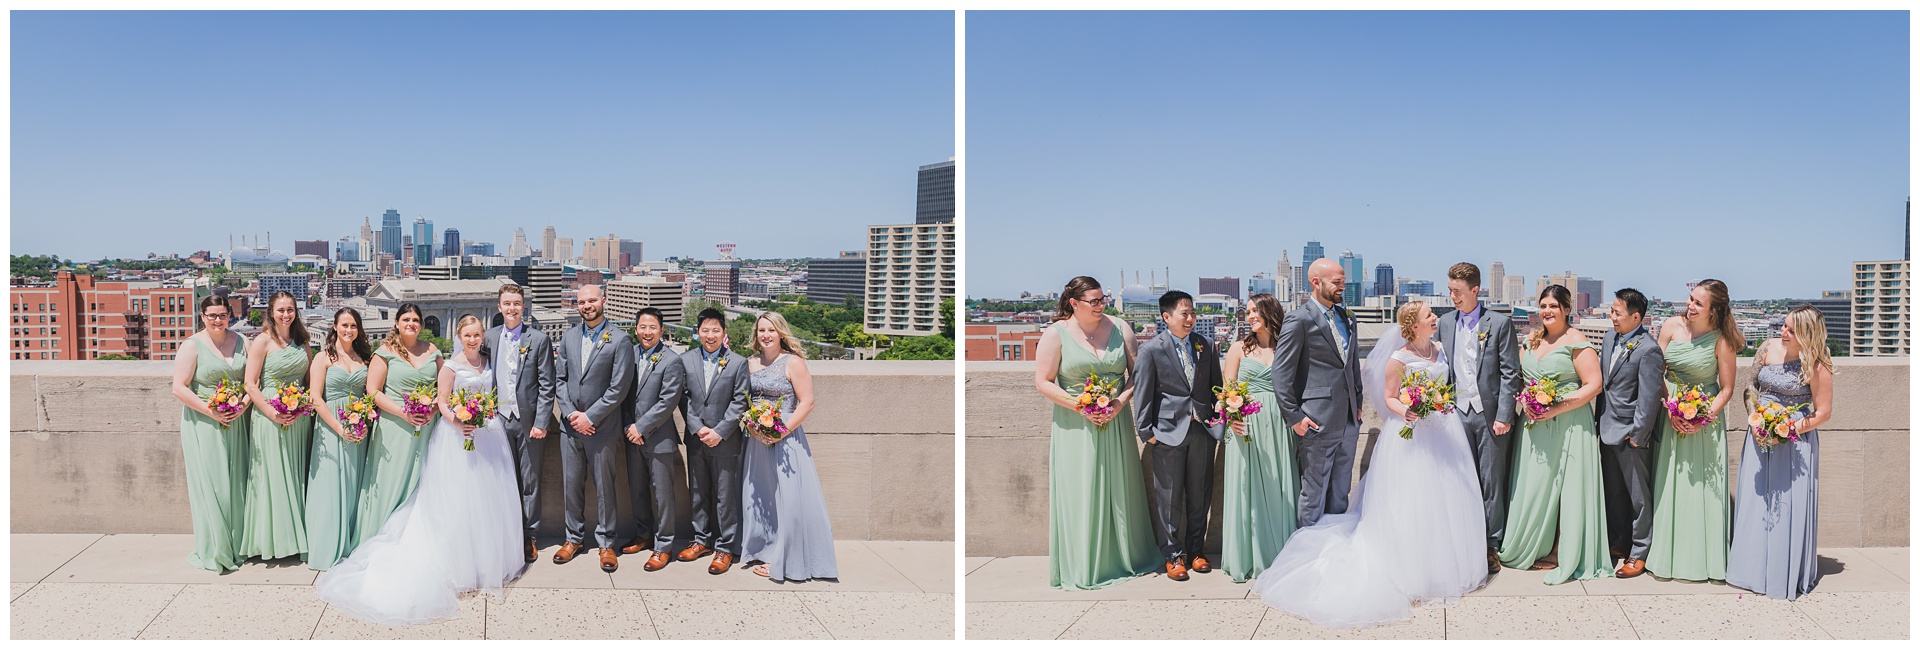 Wedding photography at Immaculate Conception Cathedral by Kansas City wedding photographers Wisdom-Watson Weddings.